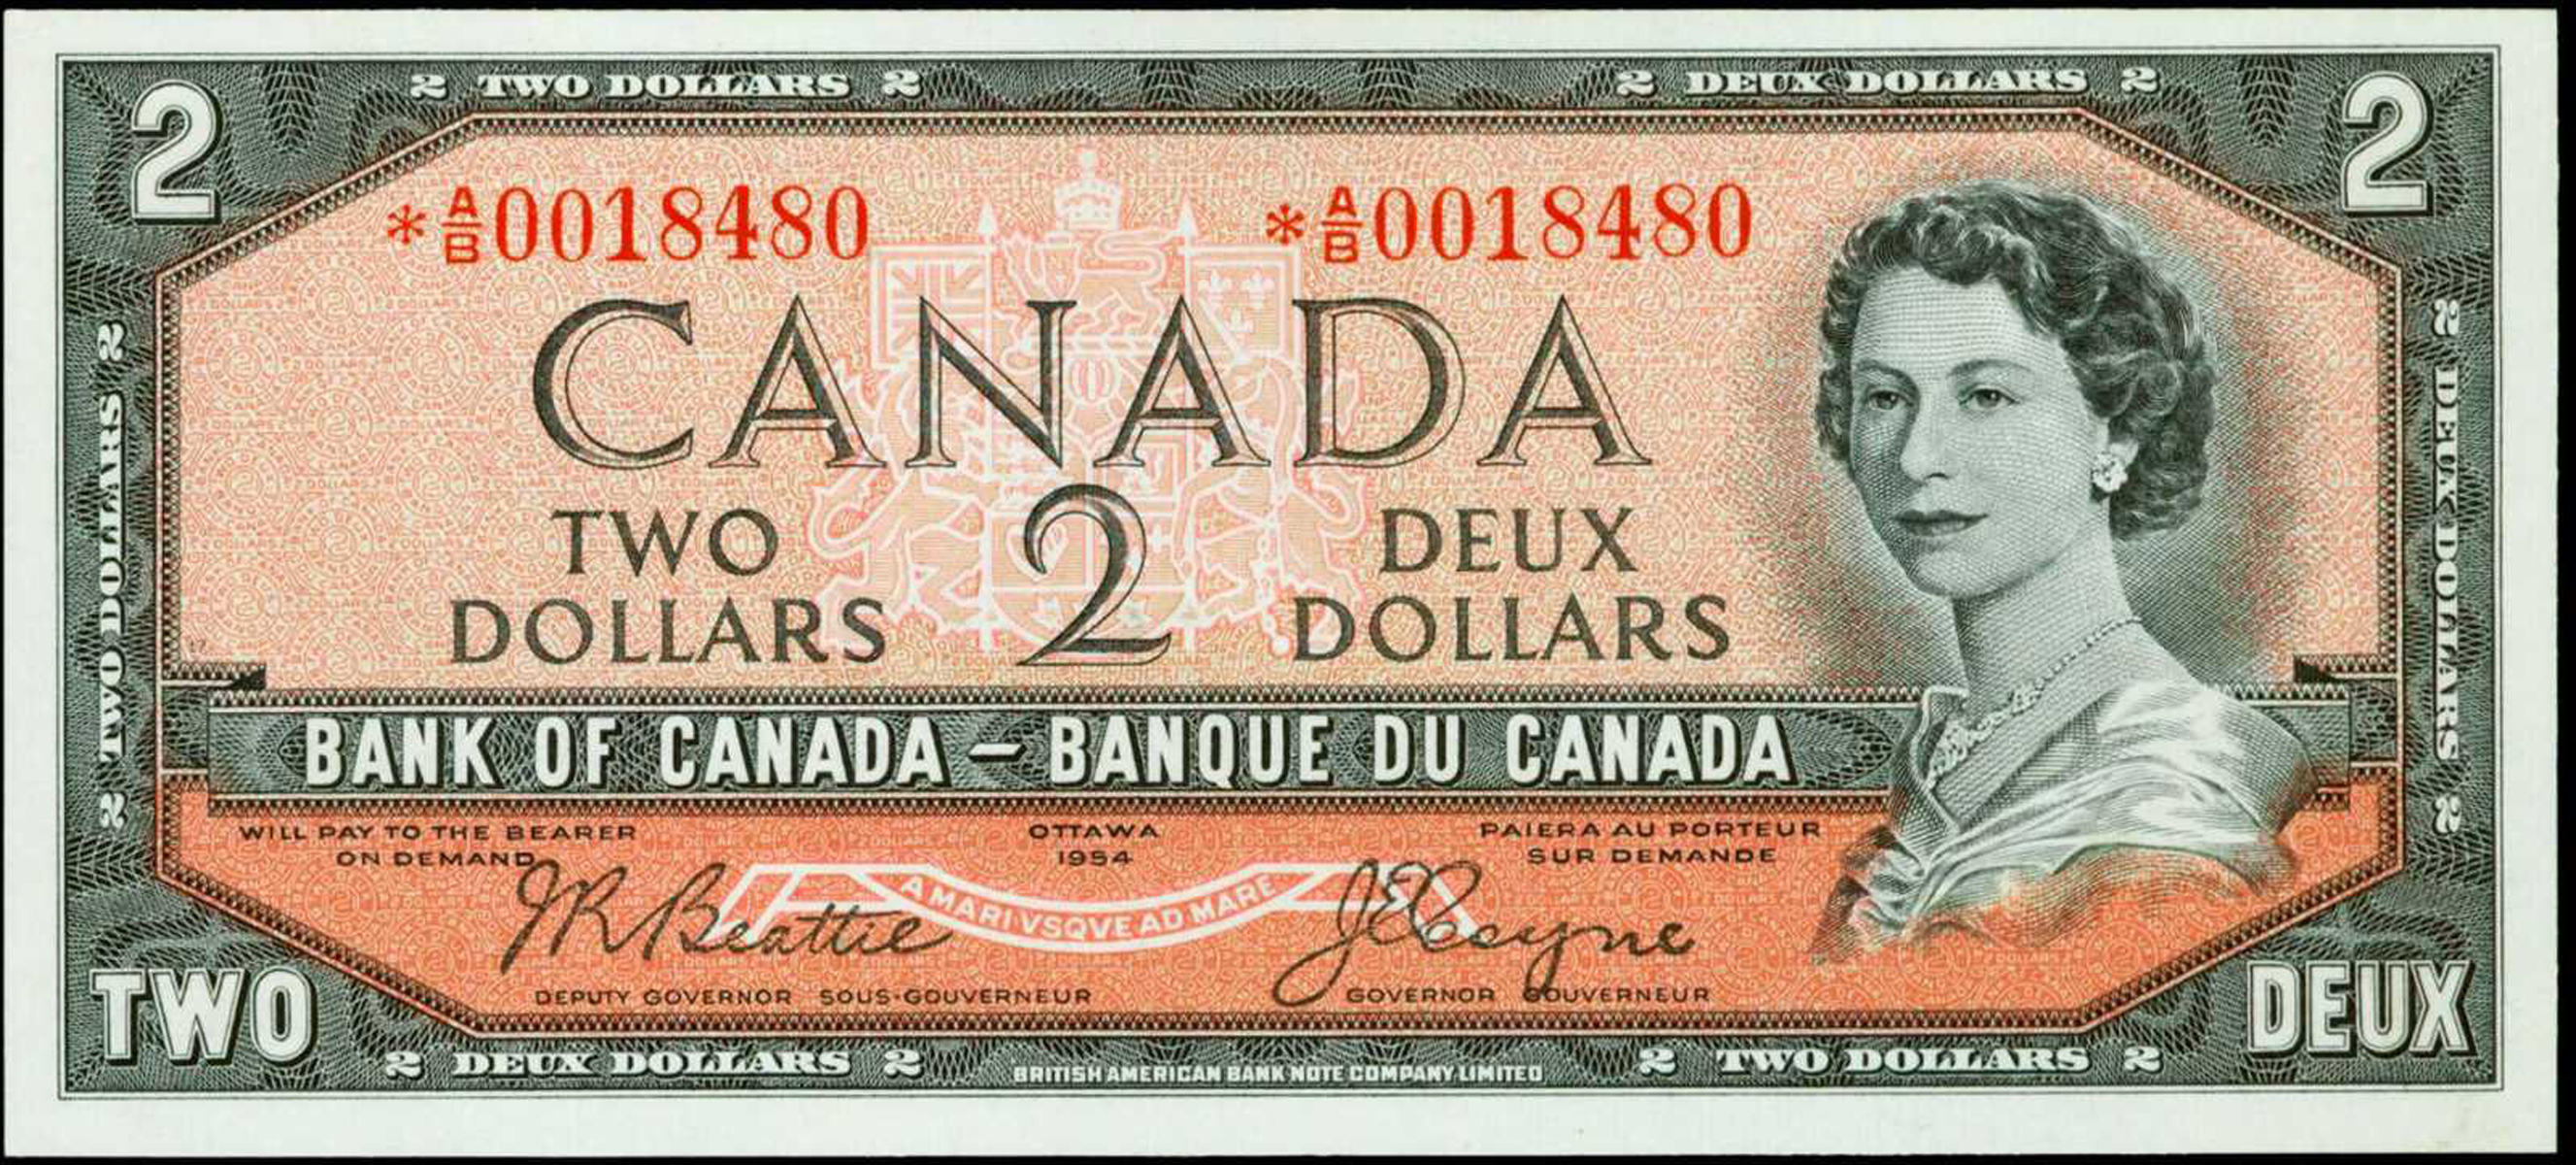 Serial Numbers 1986 Canadian 2 Dollar Bill Value Chart Value Of 1954 Devils Face 2 Bill From The Bank Of Canada Canadian Currency